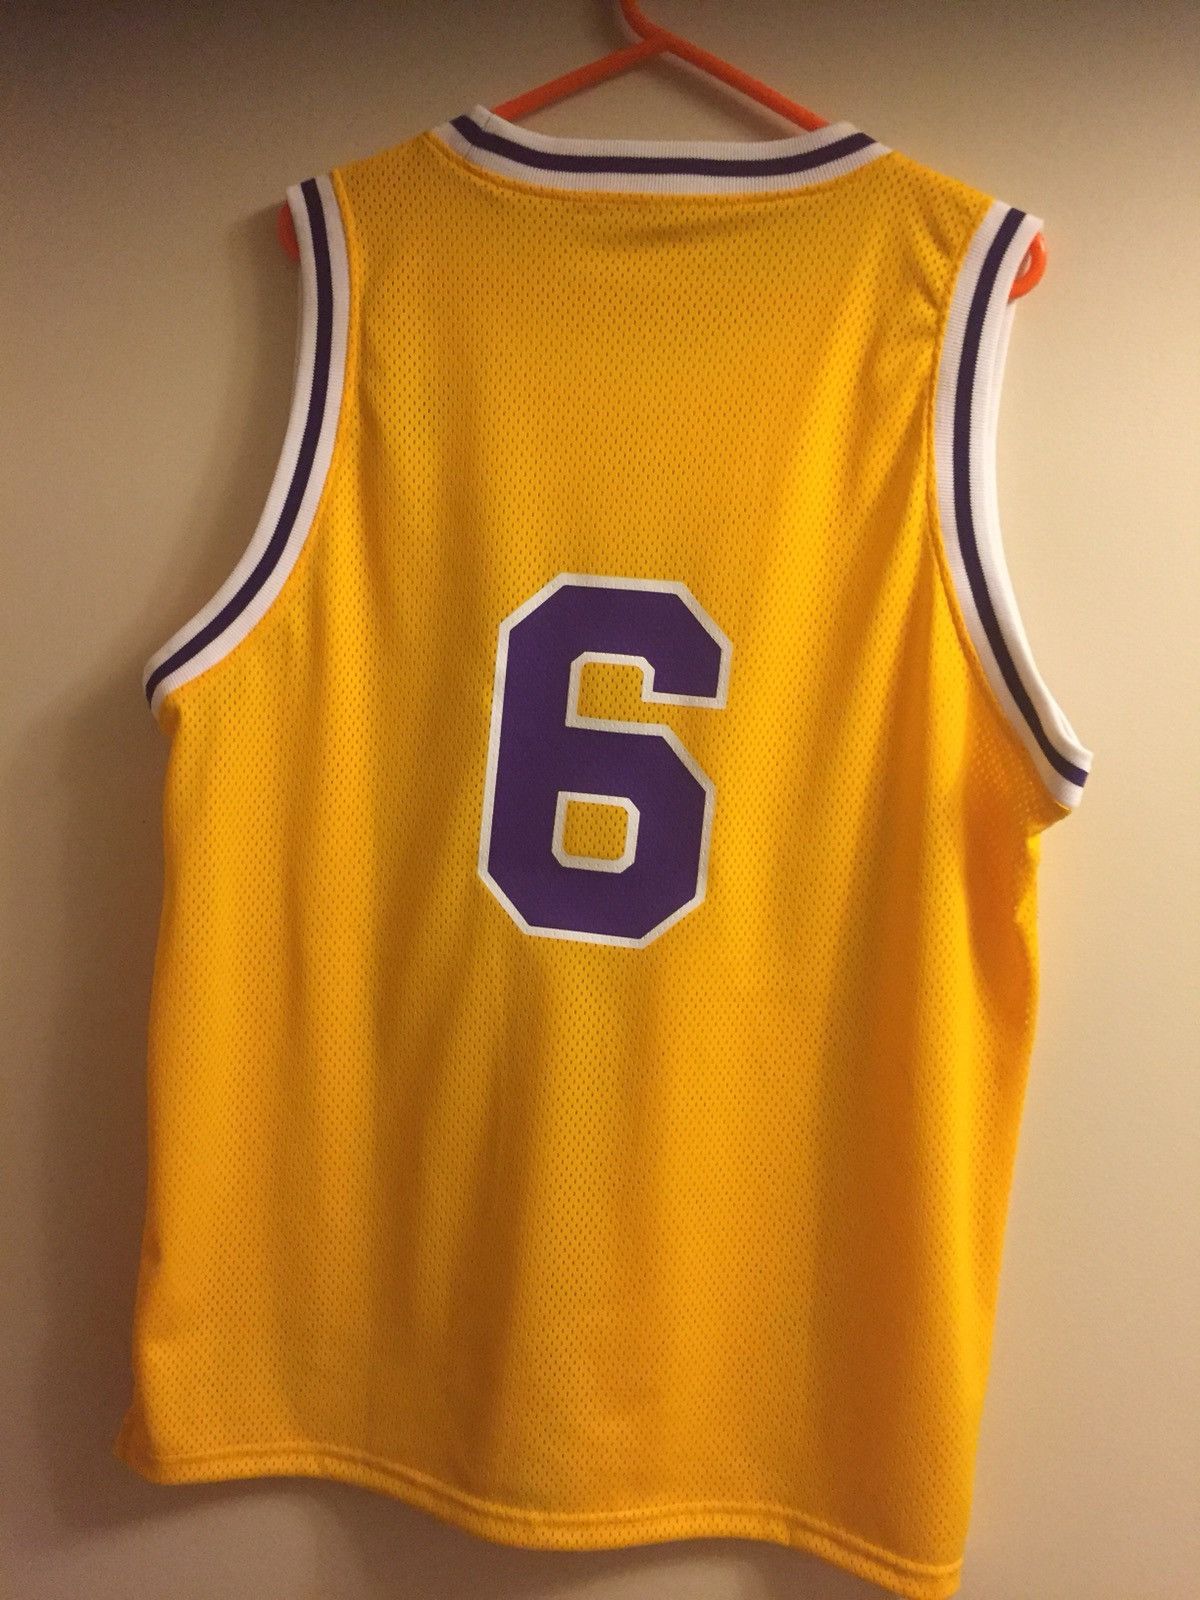 Octobers Very Own RARE Lakers colorway OVO Jersey Size US XL / EU 56 / 4 - 2 Preview